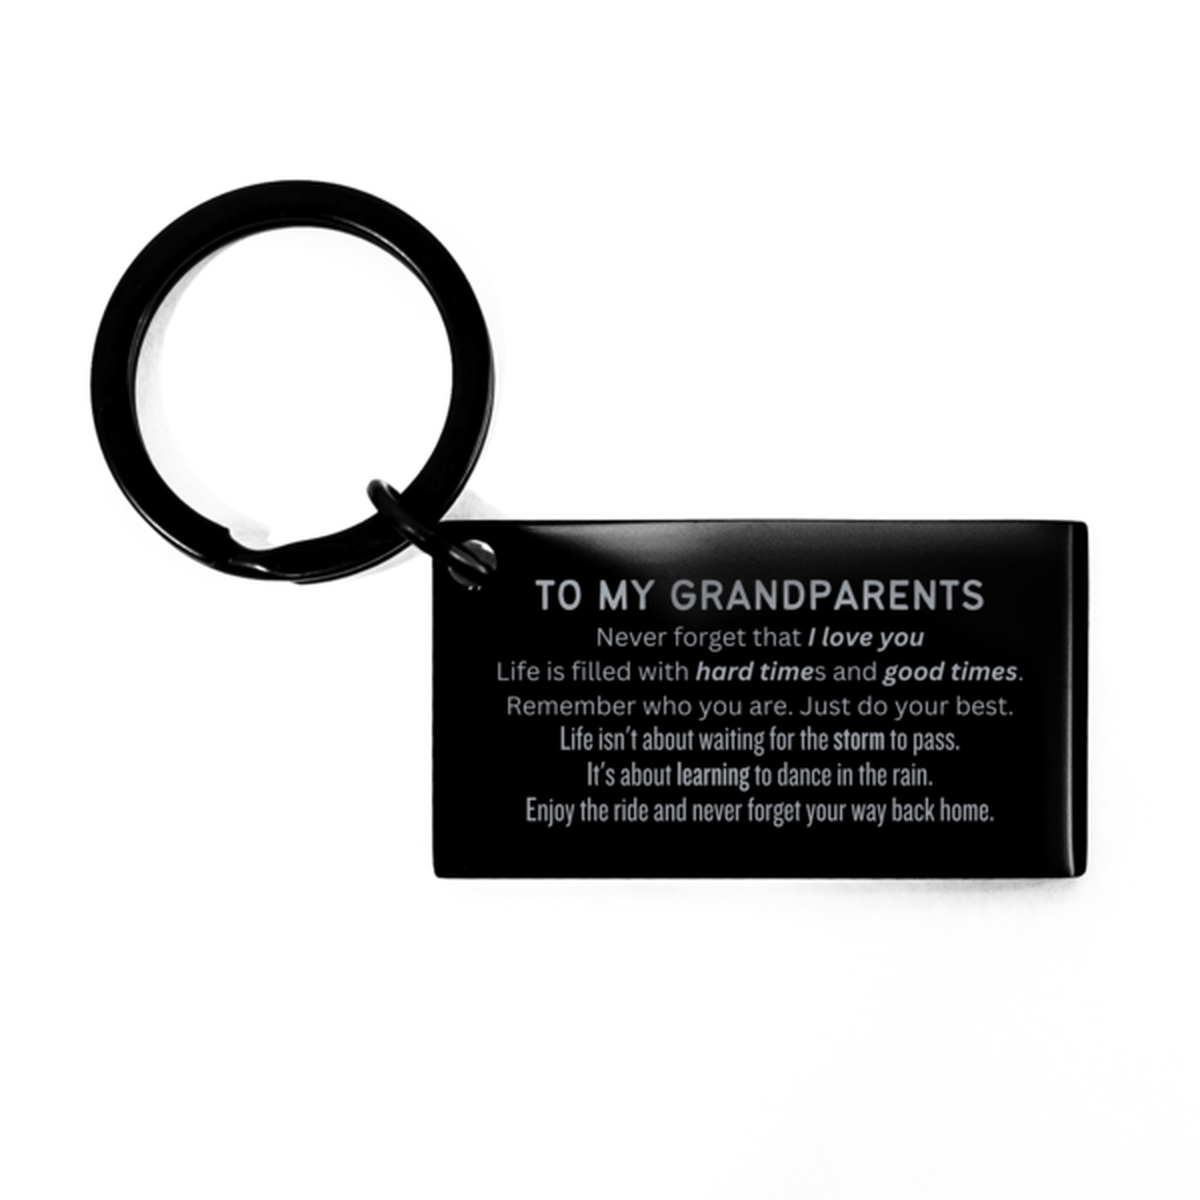 Christmas Grandparents Keychain Gifts, To My Grandparents Birthday Thank You Gifts For Grandparents, Graduation Unique Gifts For Grandparents To My Grandparents Never forget that I love you life is filled with hard times and good times. Remember who you a